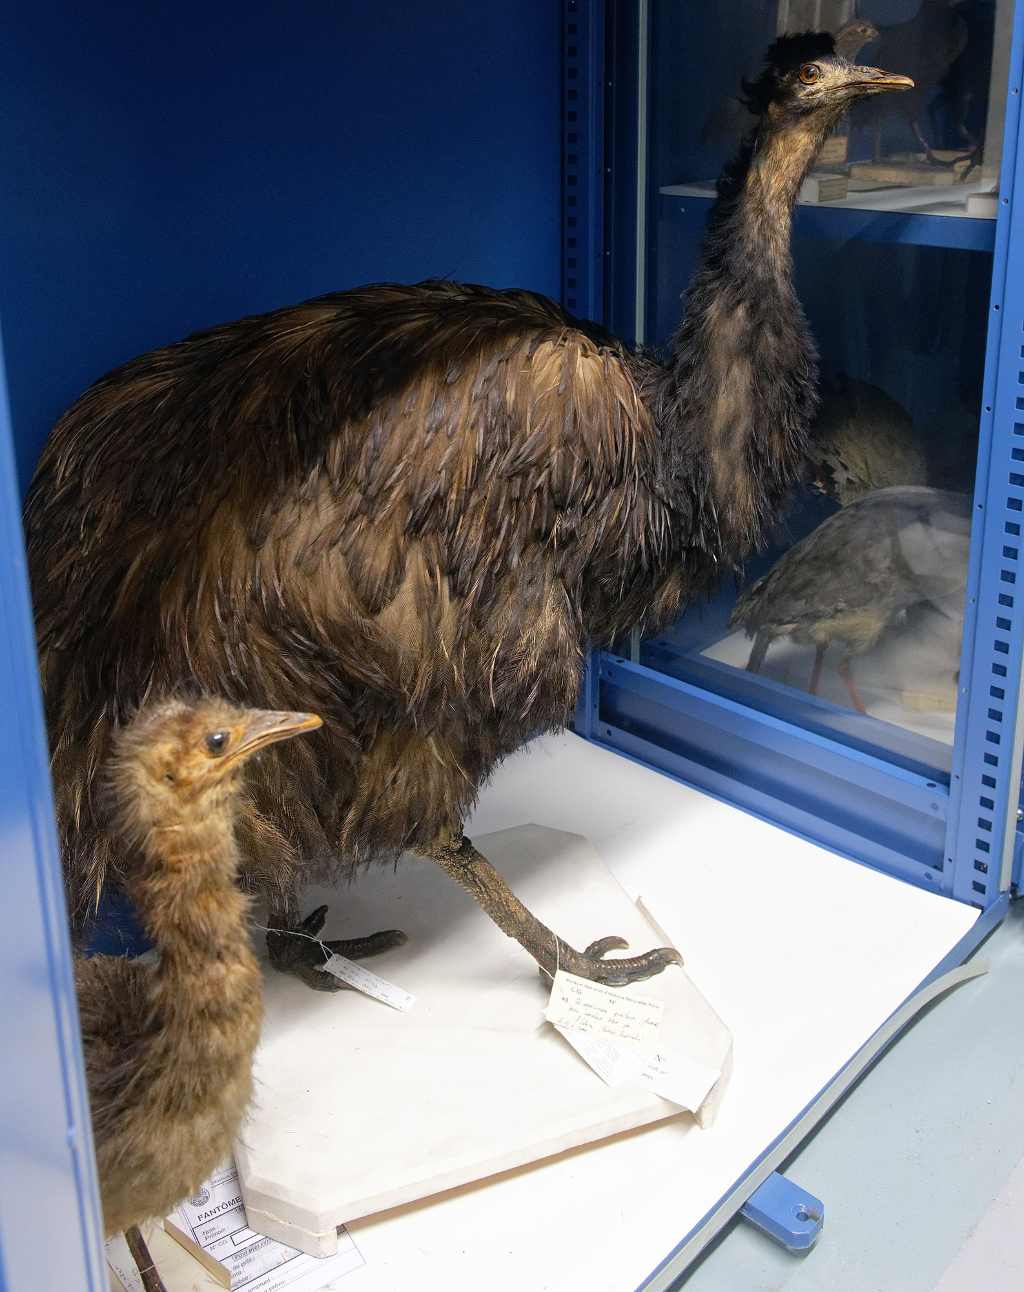 King Island emu (Dromaius novaehollandiae minor) in the collections of the French National Museum of Natural History. Image credit: Wikipedia Commons/Marie-Lan Taÿ Pamart  